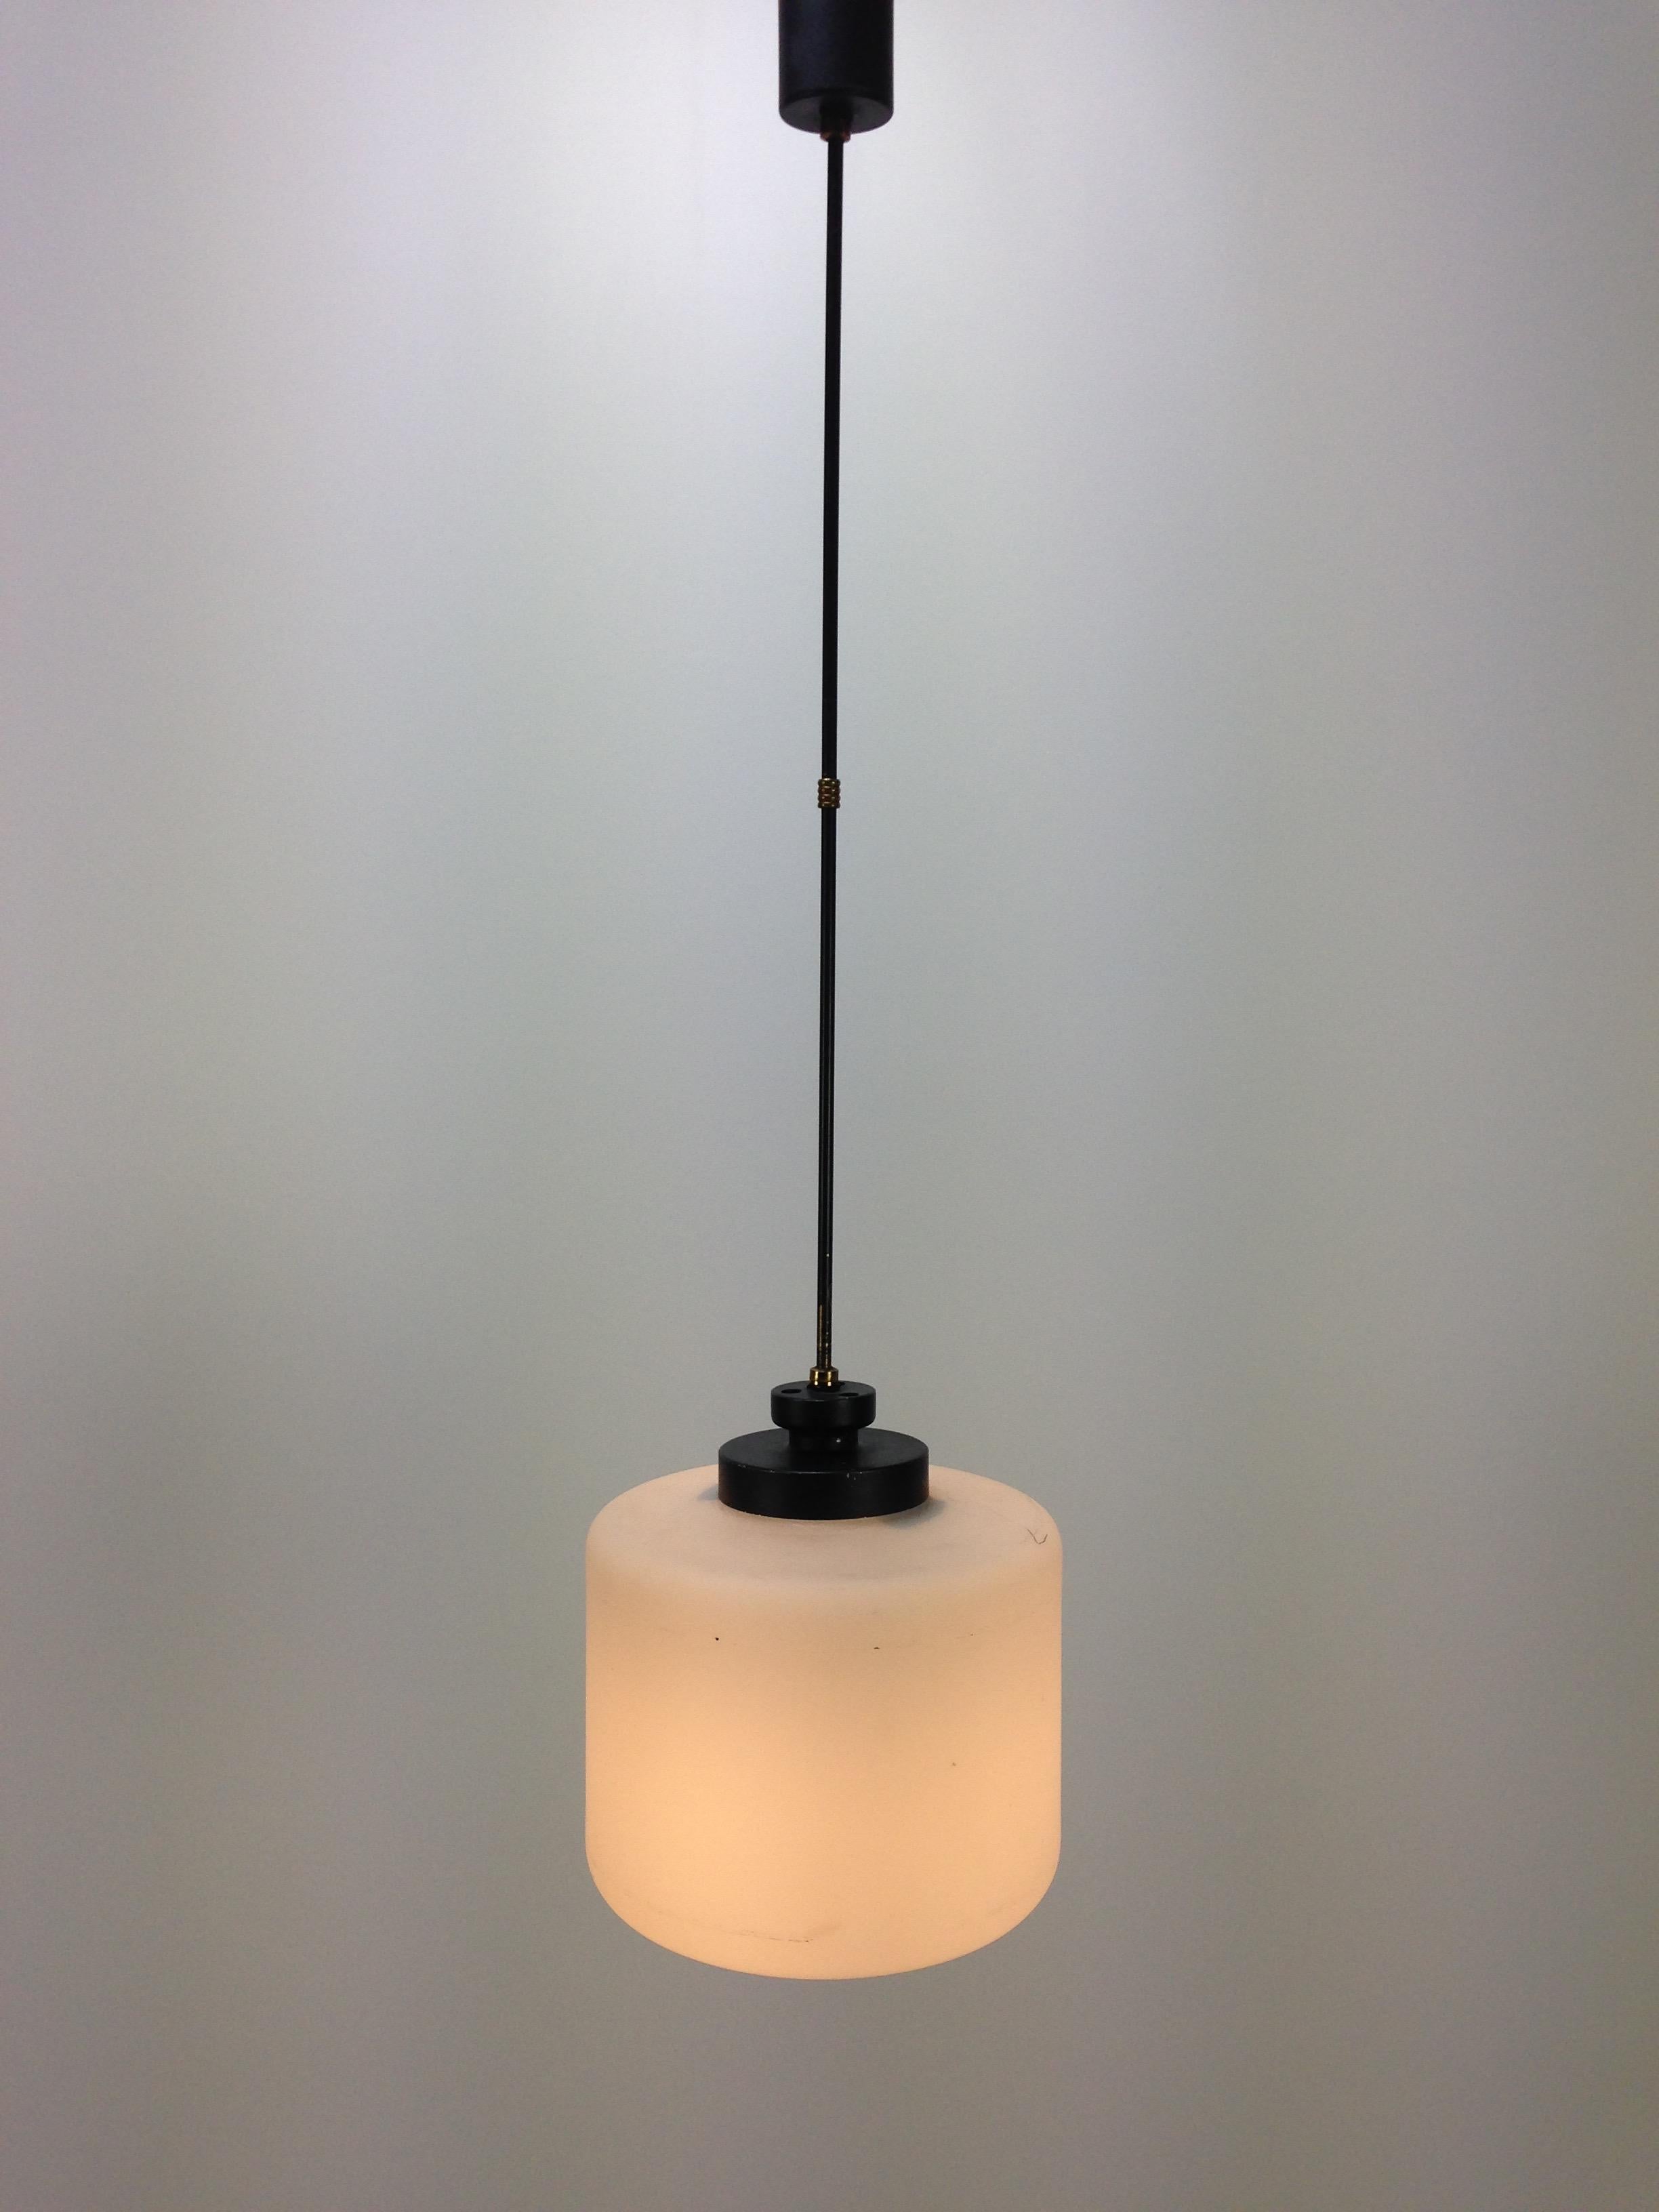 Very nice Italian pendant fabricated by Stilnovo in the 1950s.

A beautiful hand blown glass shade in milk glass combined with a brass and black metal body.

Very good vintage condition, no cracks or chips.  
The wiring has been checked by a